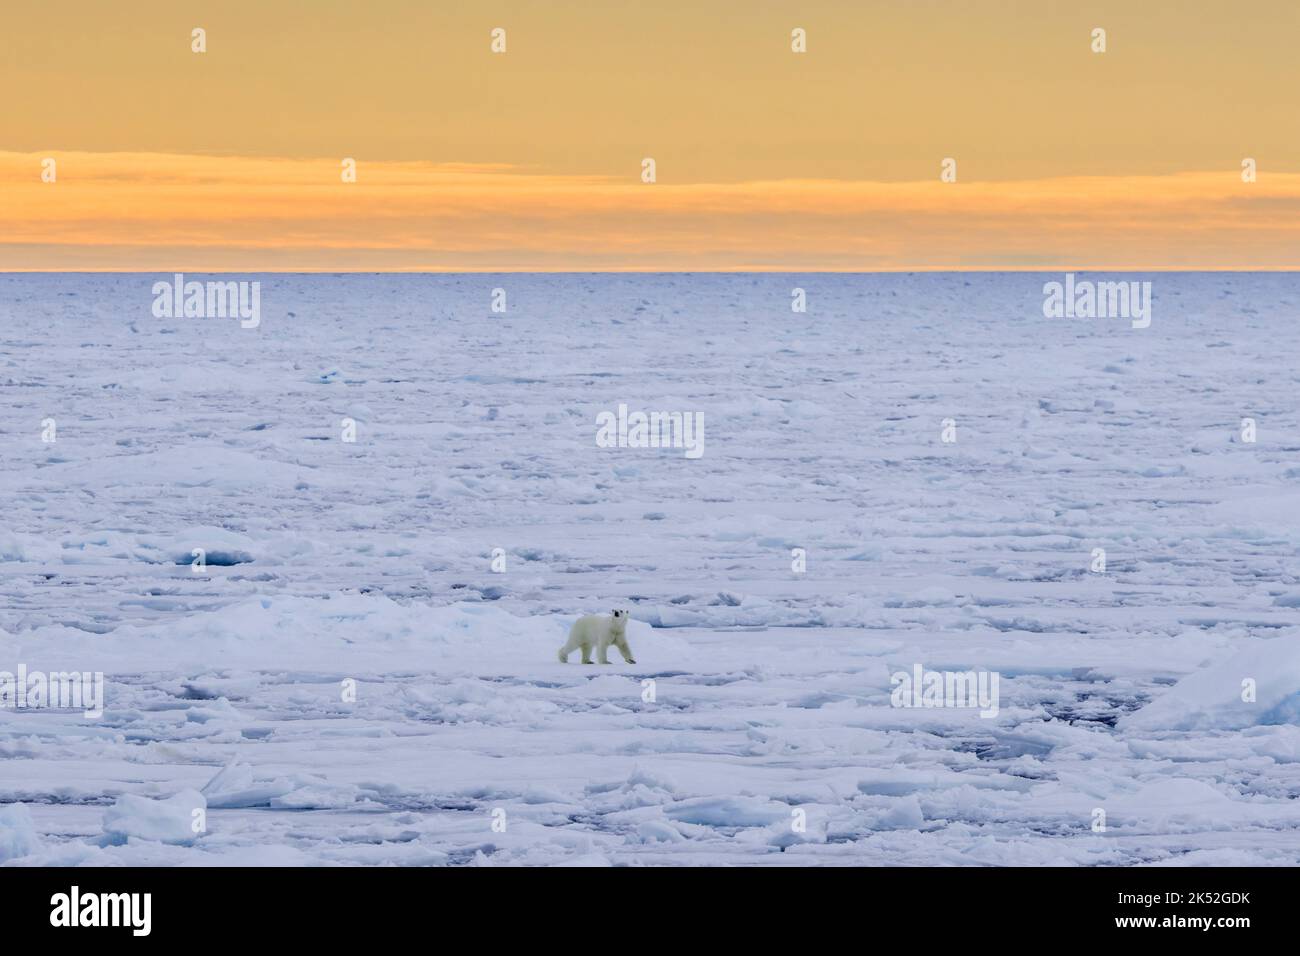 Lone polar bear (Ursus maritimus) hunting on pack ice in the Arctic Ocean along the Svalbard coast, Spitsbergen, Norway Stock Photo